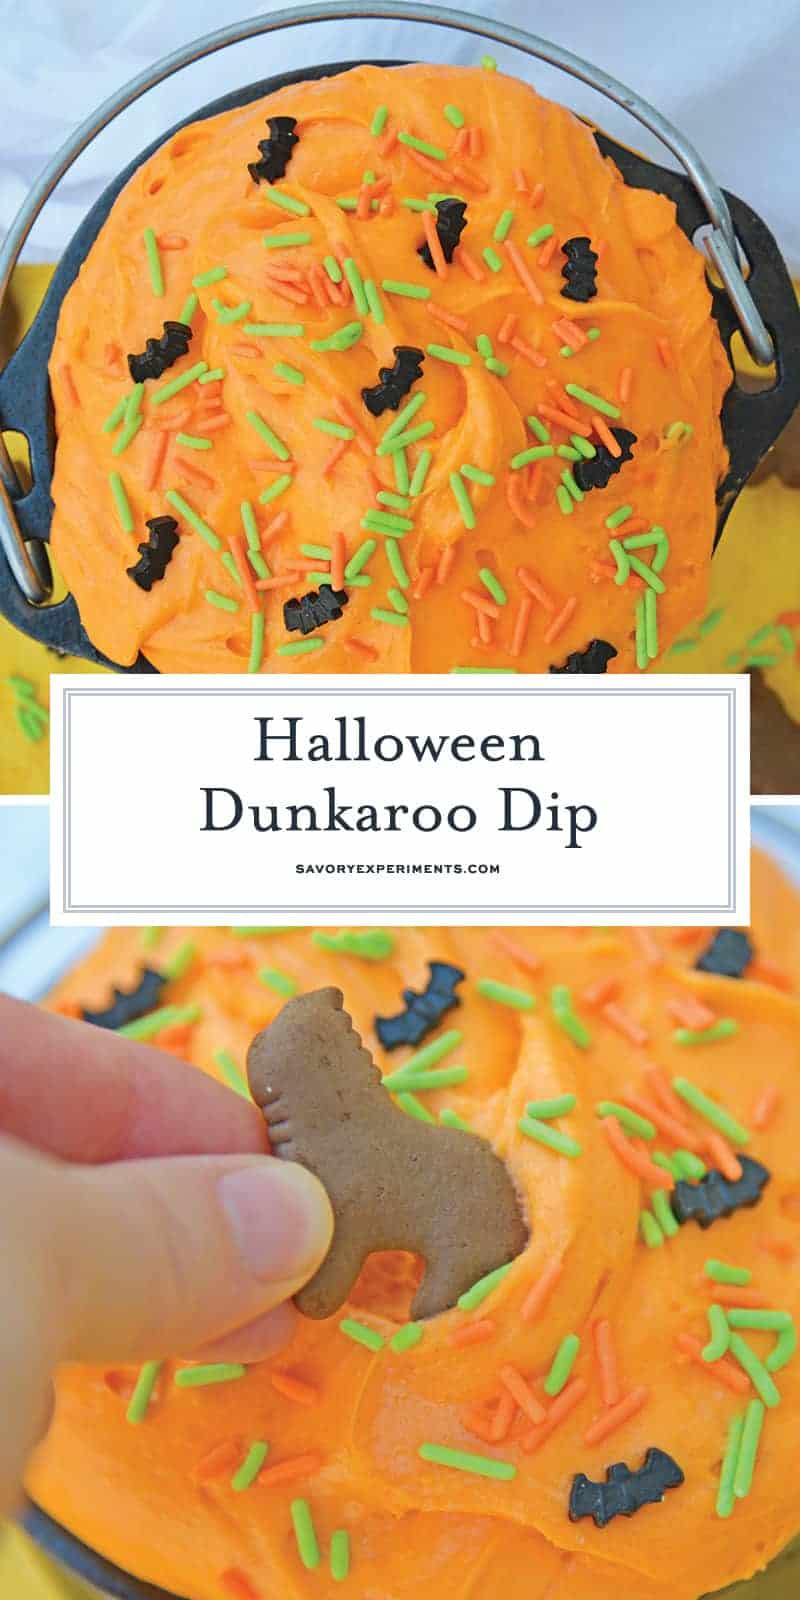 dunkaroo dip is a quick and easy cake batter dip that will